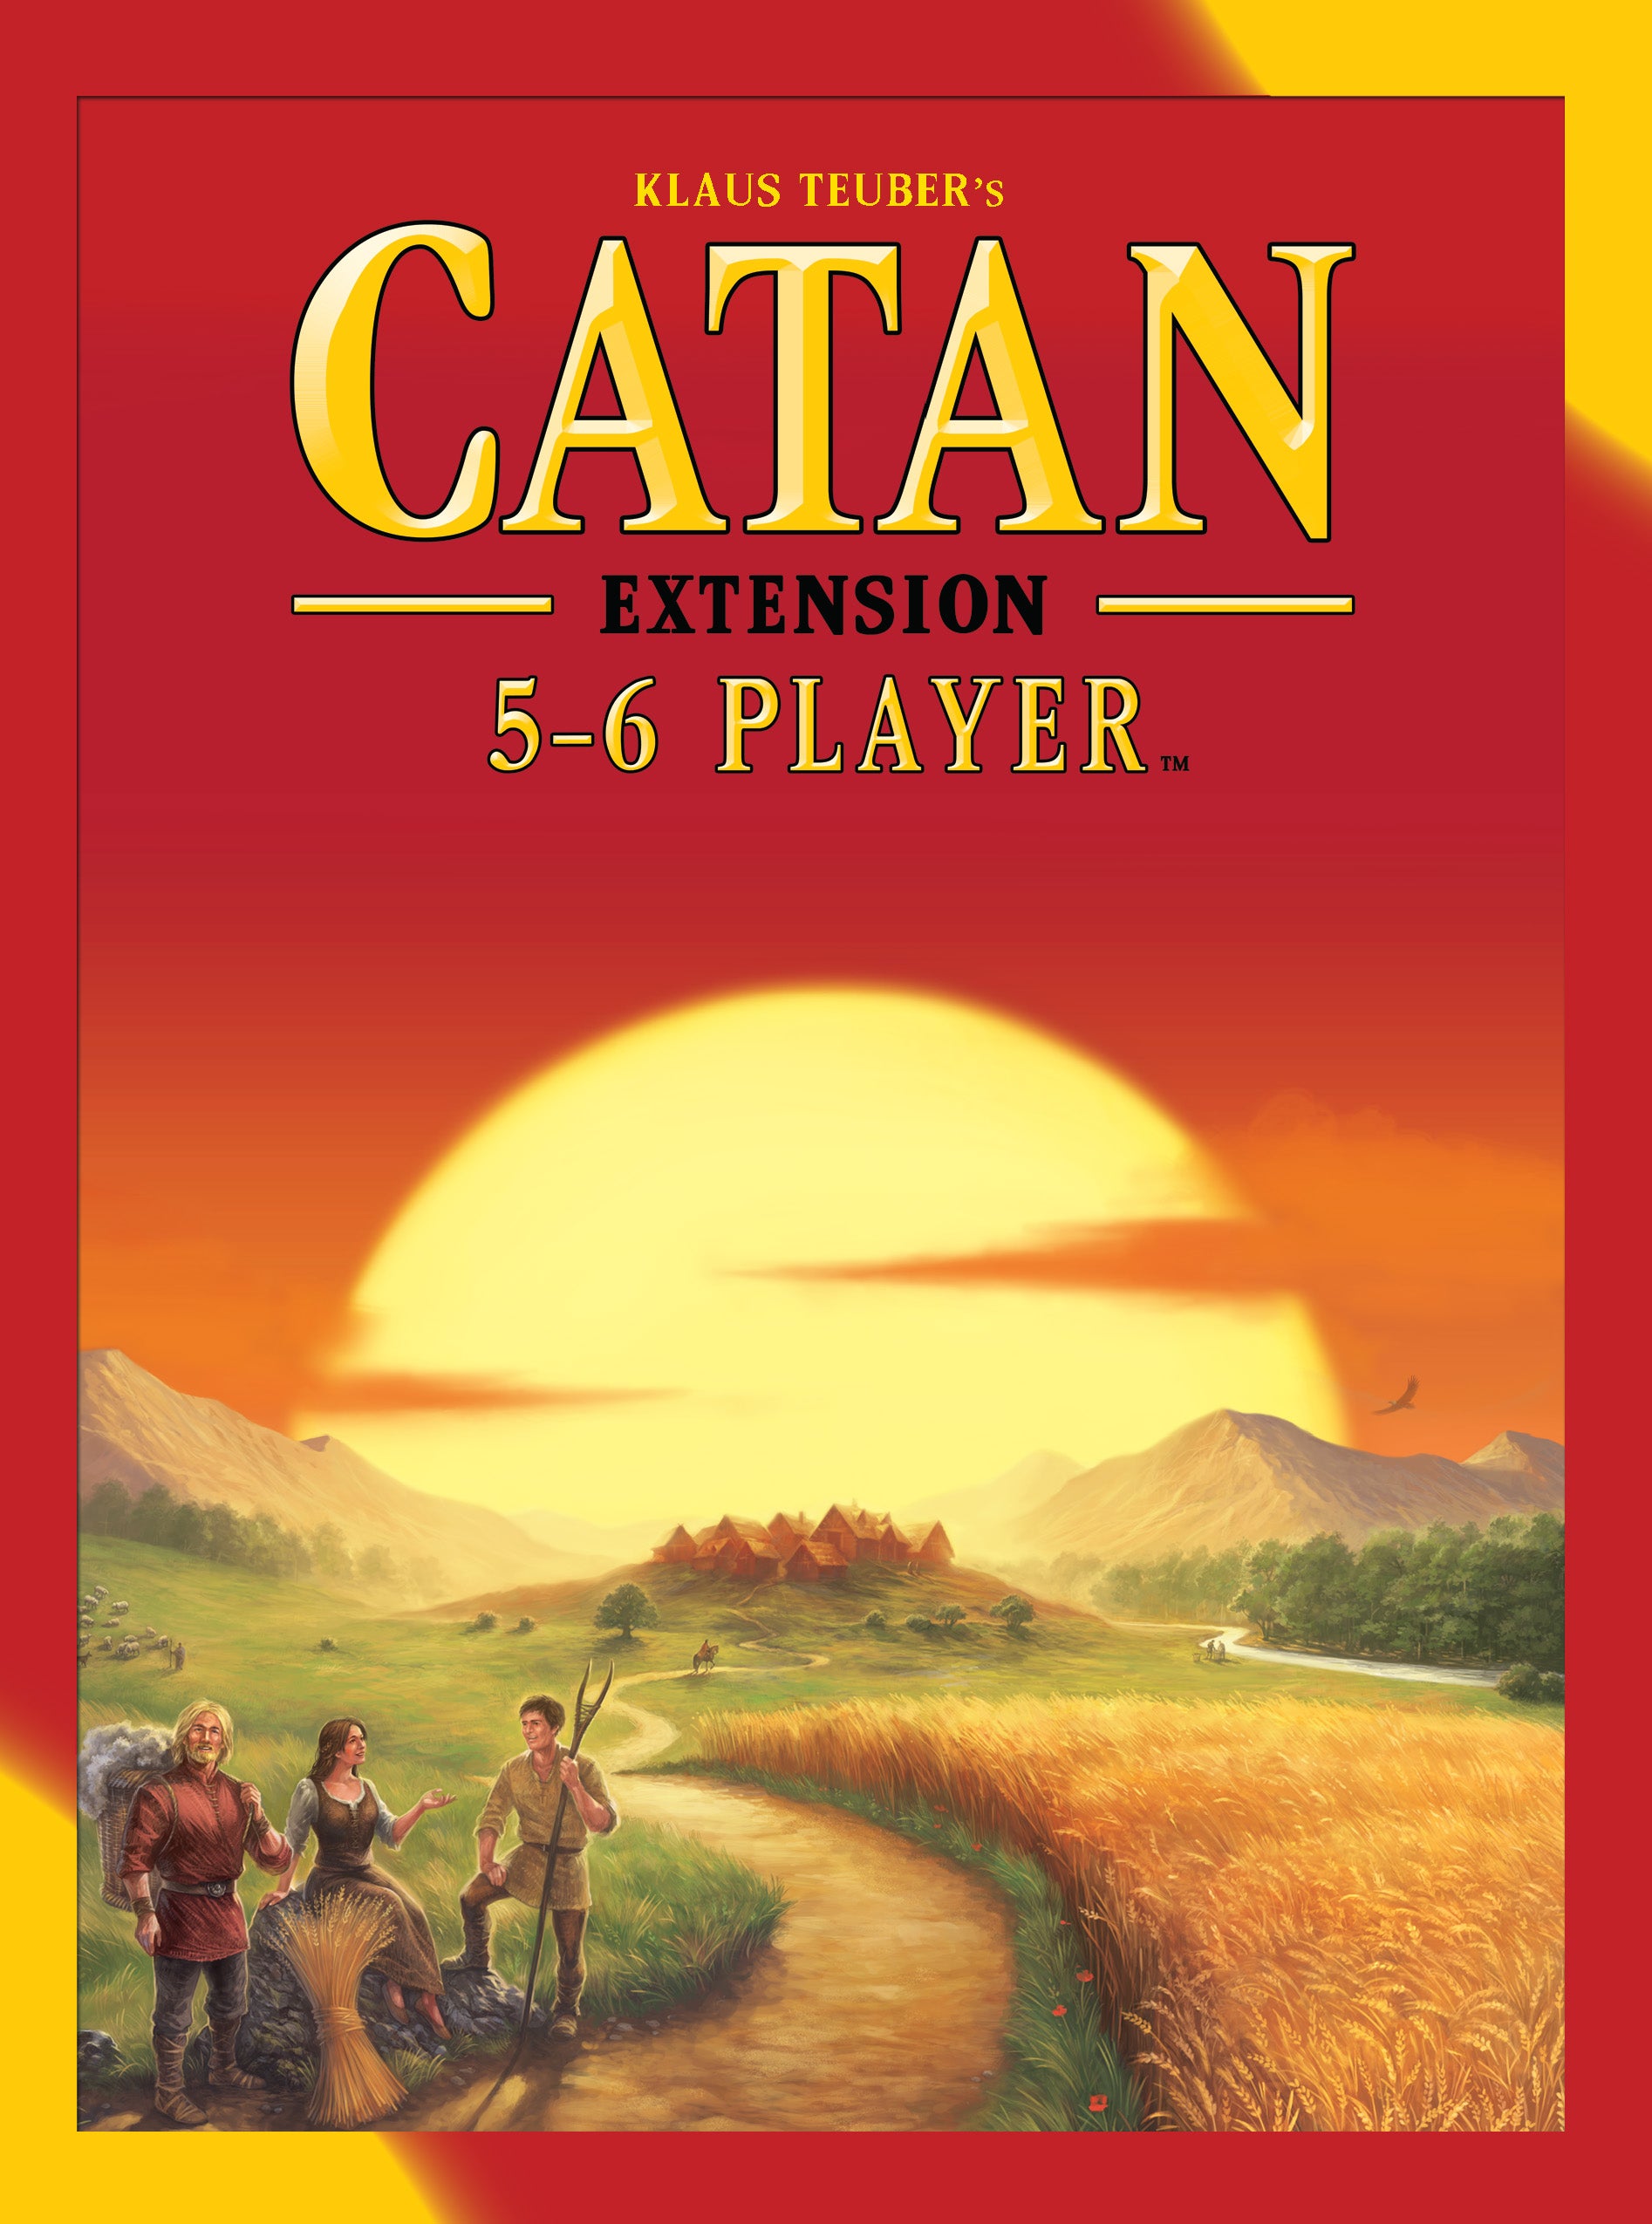 Box art of Catan 5-6 Player Expansion